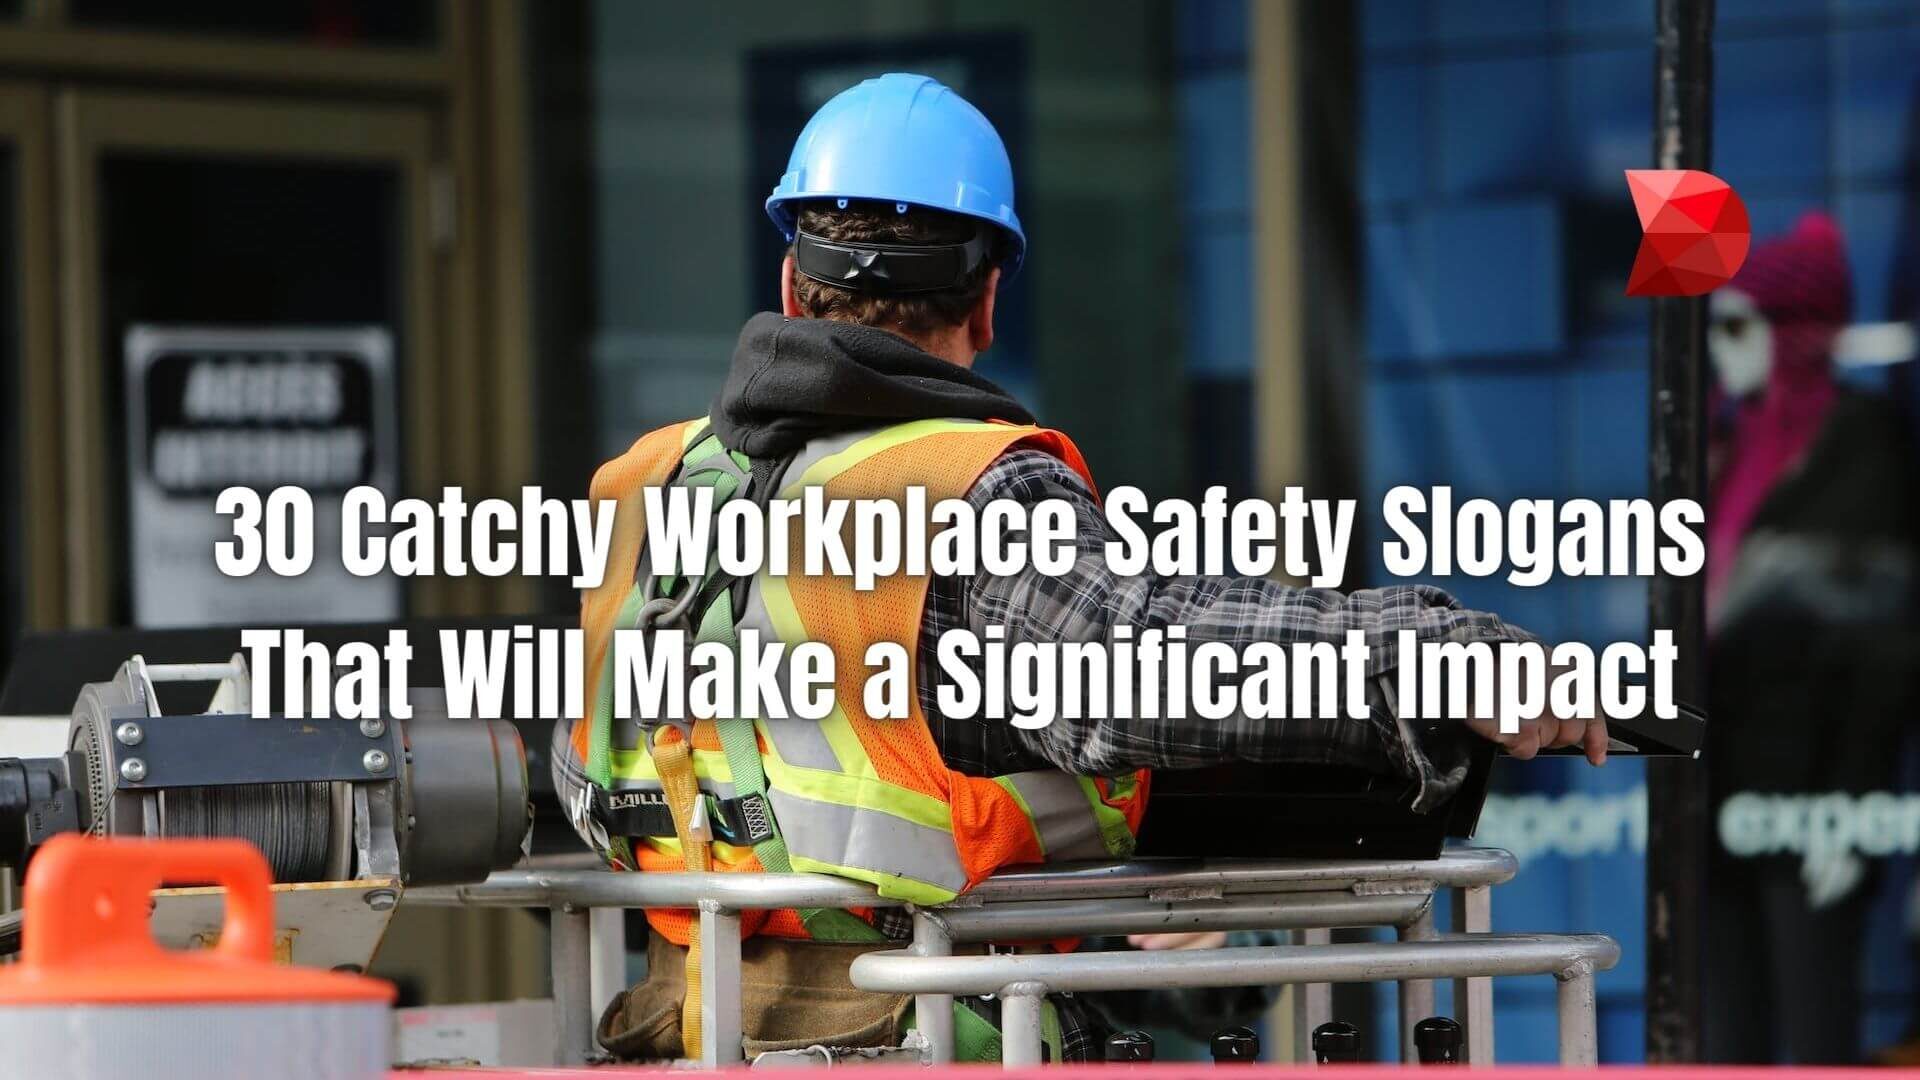 Unleash the potential of 30 impactful workplace safety slogans! Learn how to make a significant impact on safety with this complete guide.